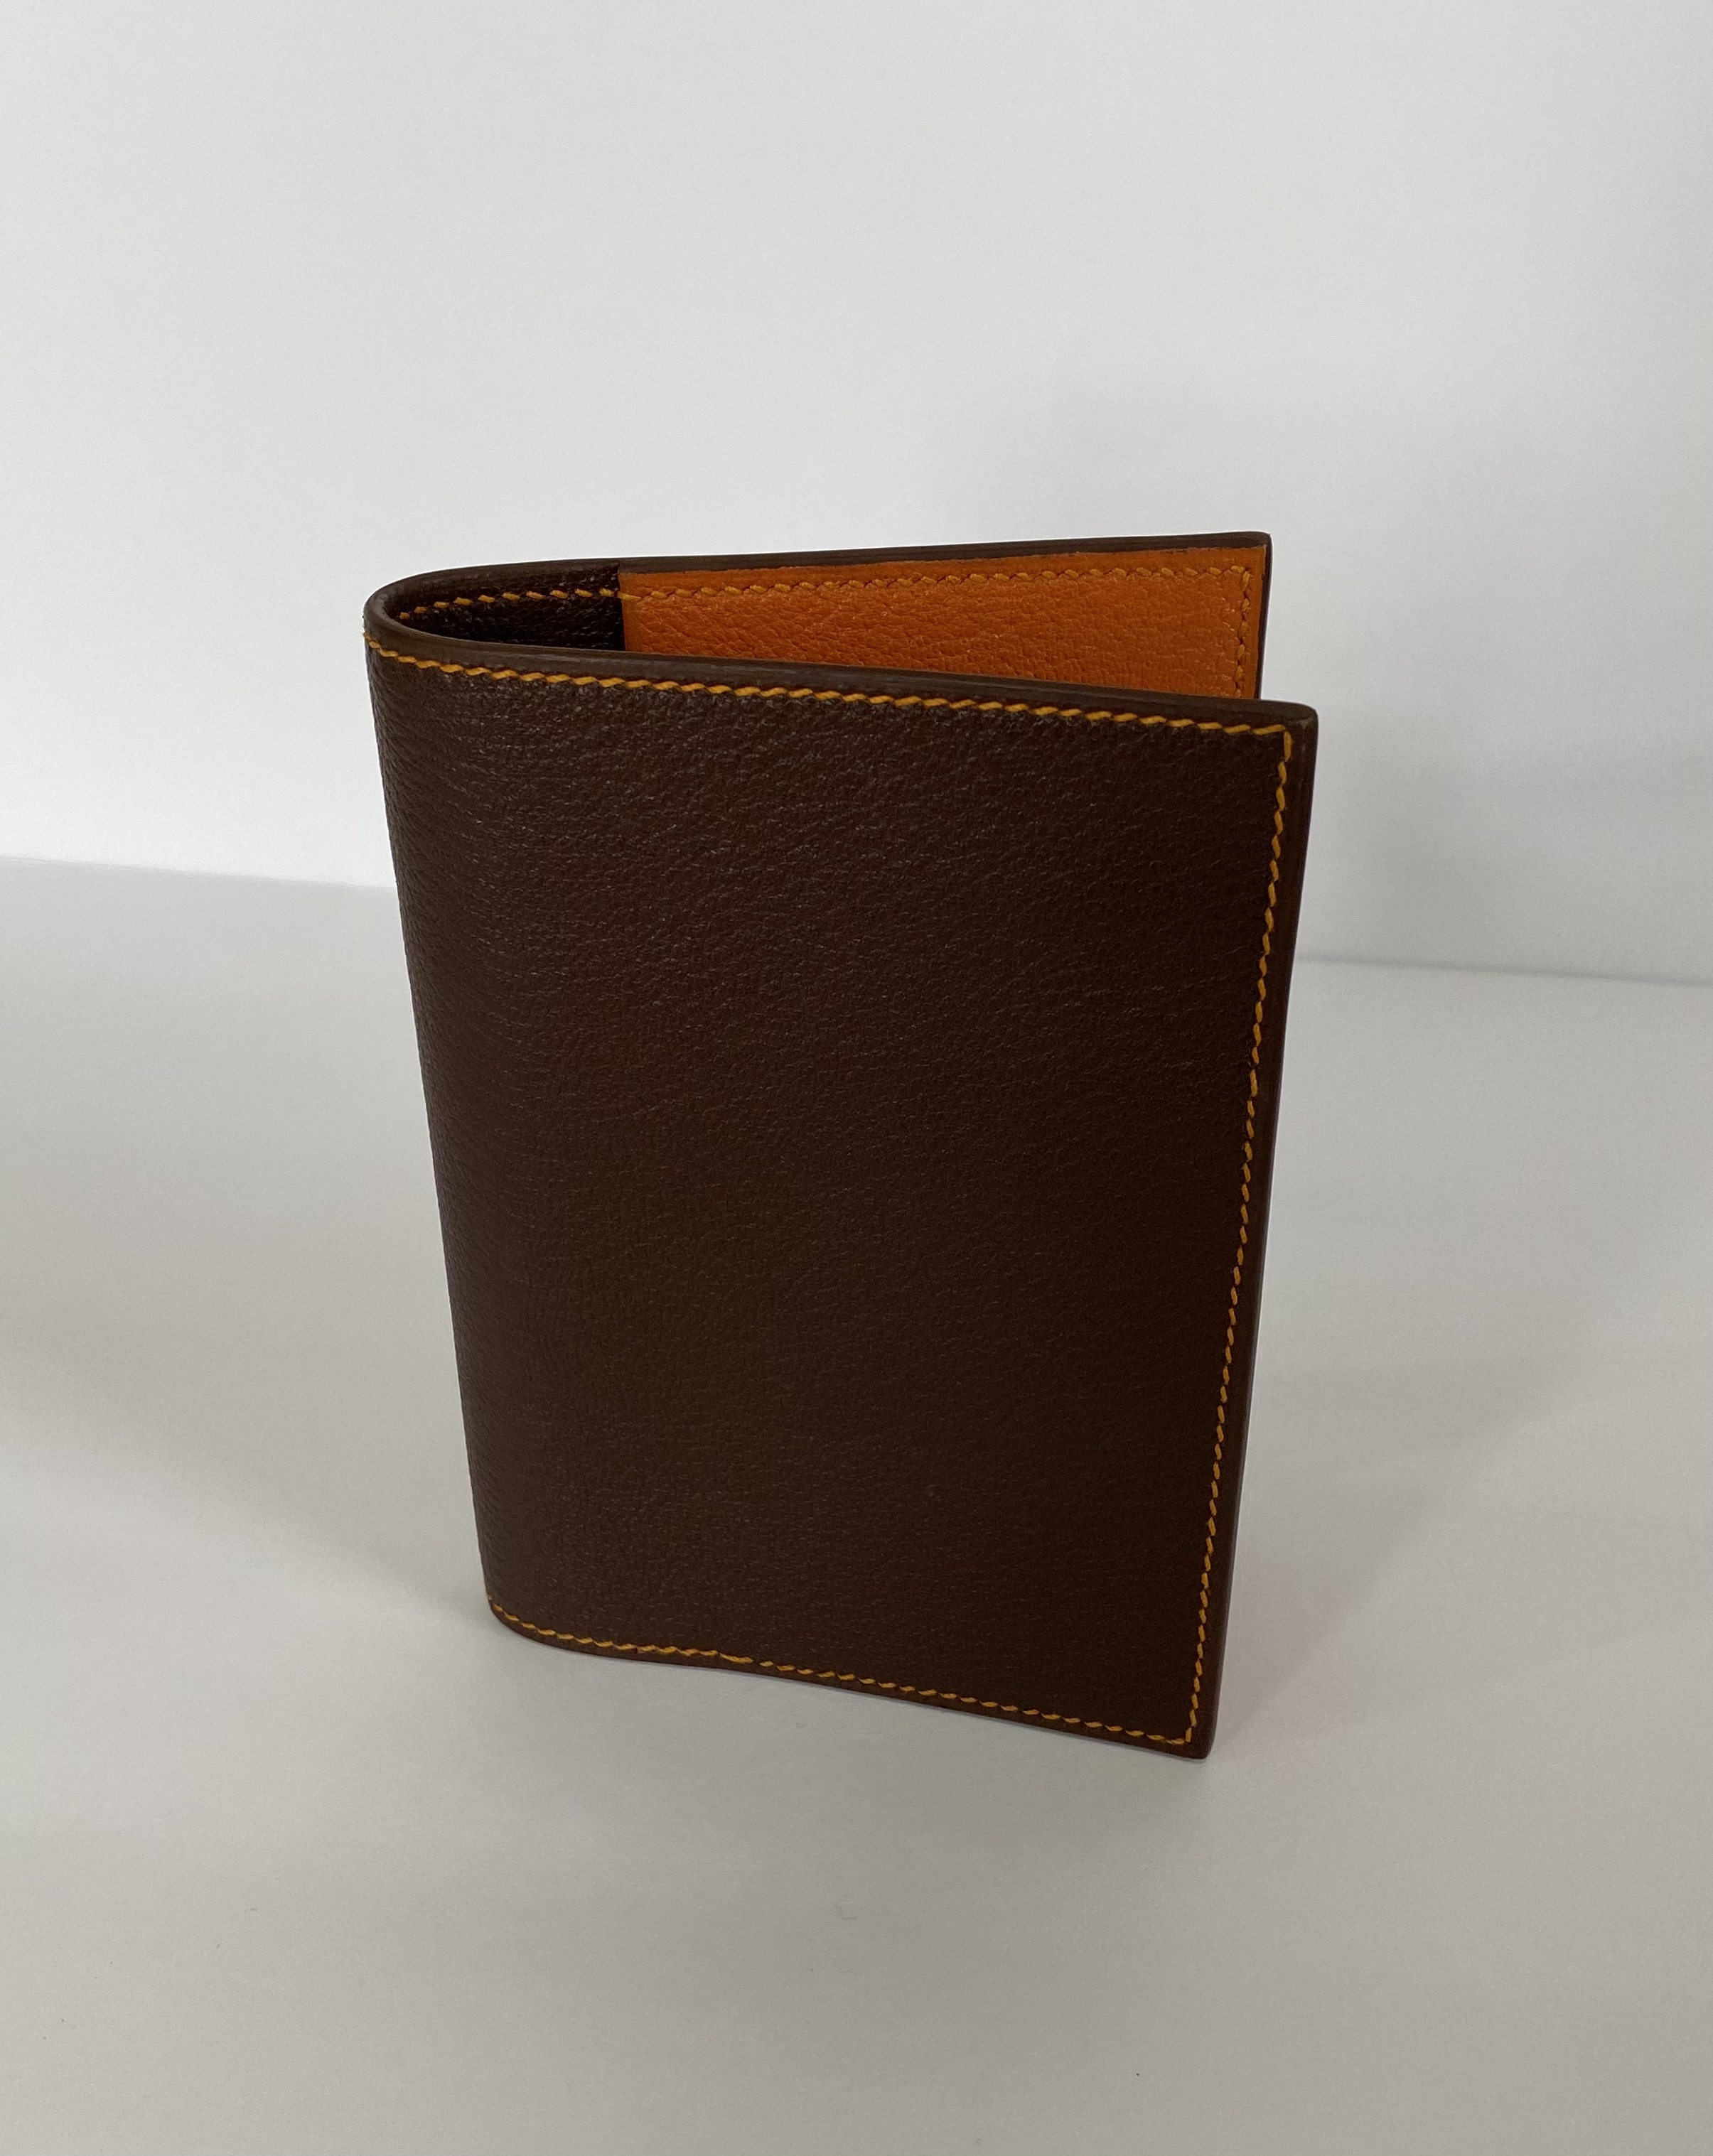 Passport Wallet
hand stitched and crafted
$125.